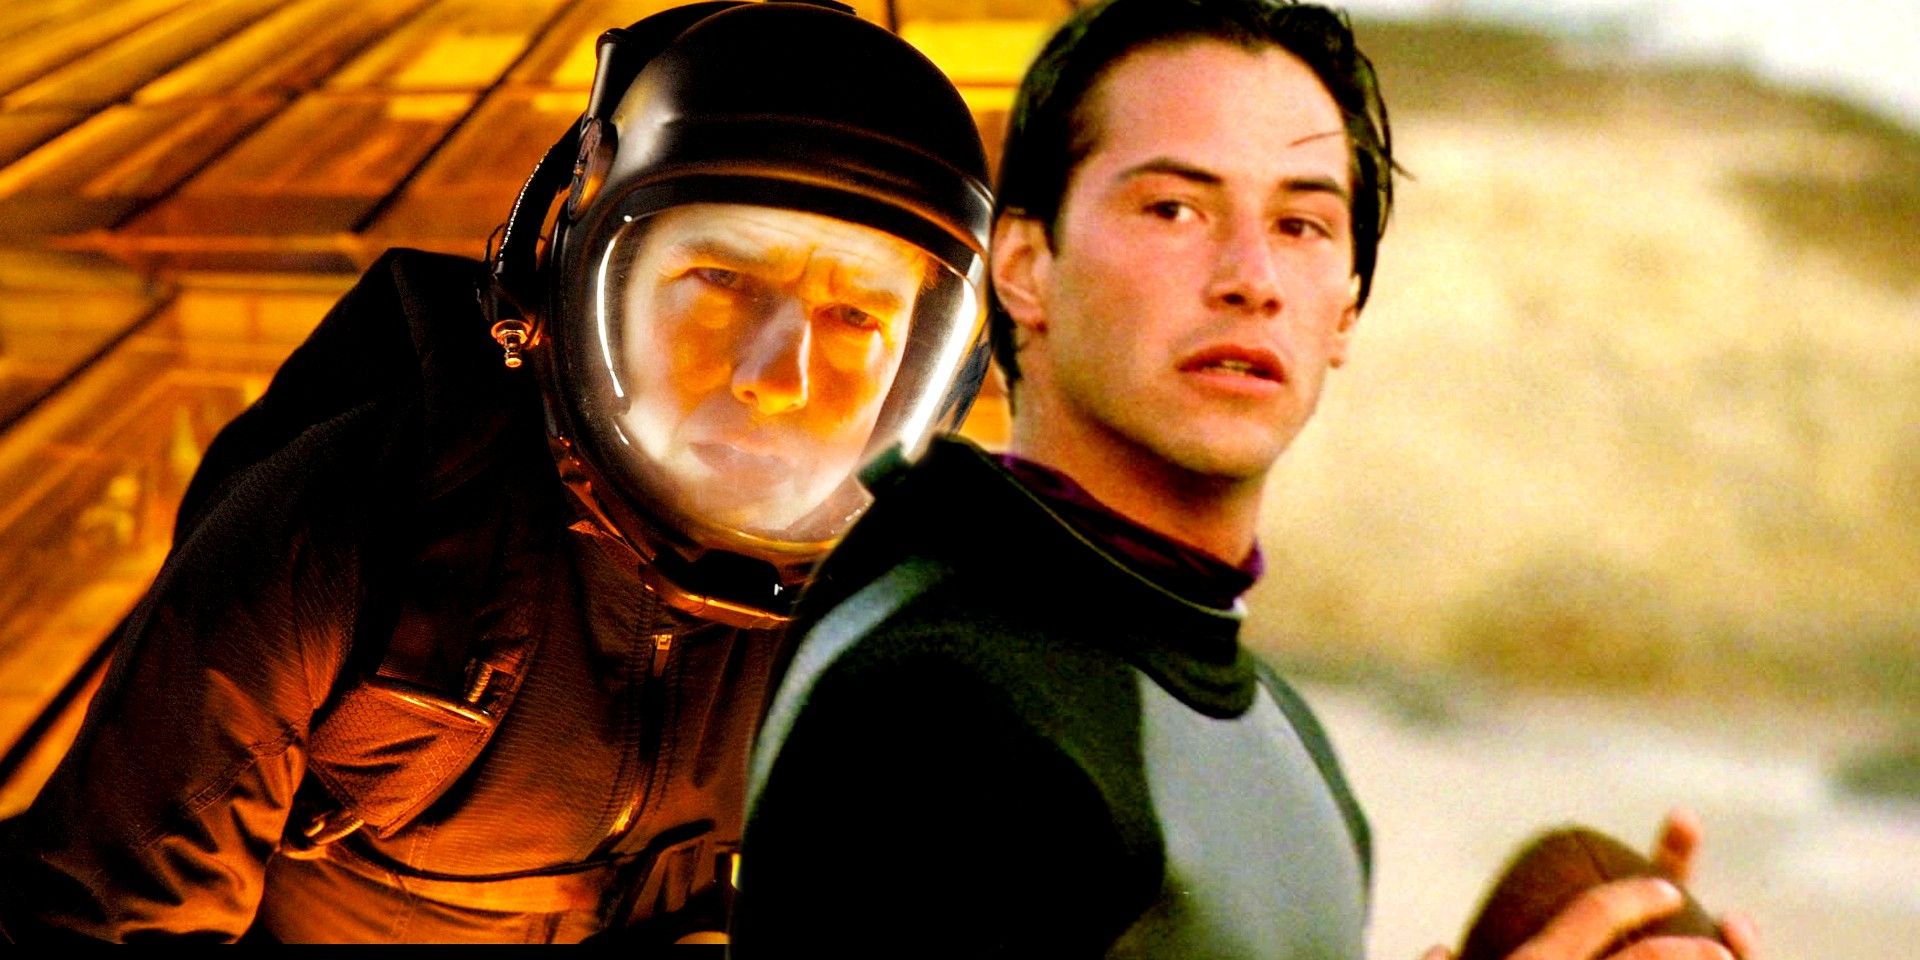 Custom image of Tom Cruise in his skygdiving suit in Mission Impossible Fallout and Keanu Reeves holding a football in Point Break